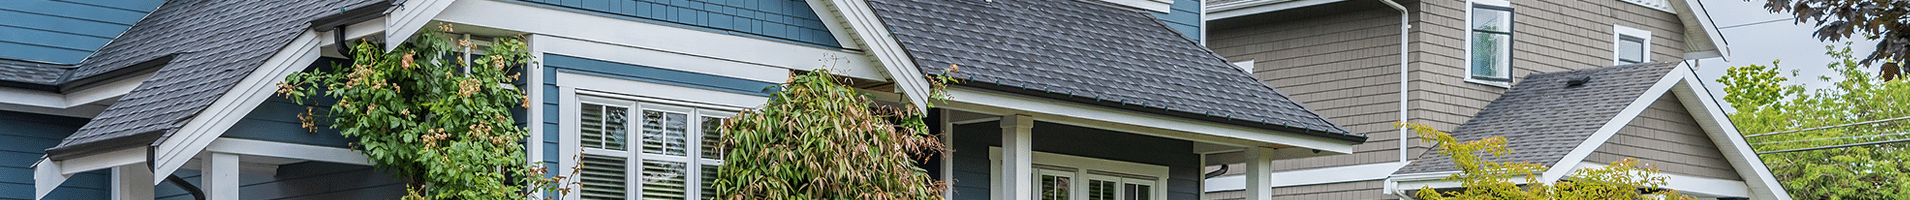 Gutter Cleaning Services in New Smyrna FL